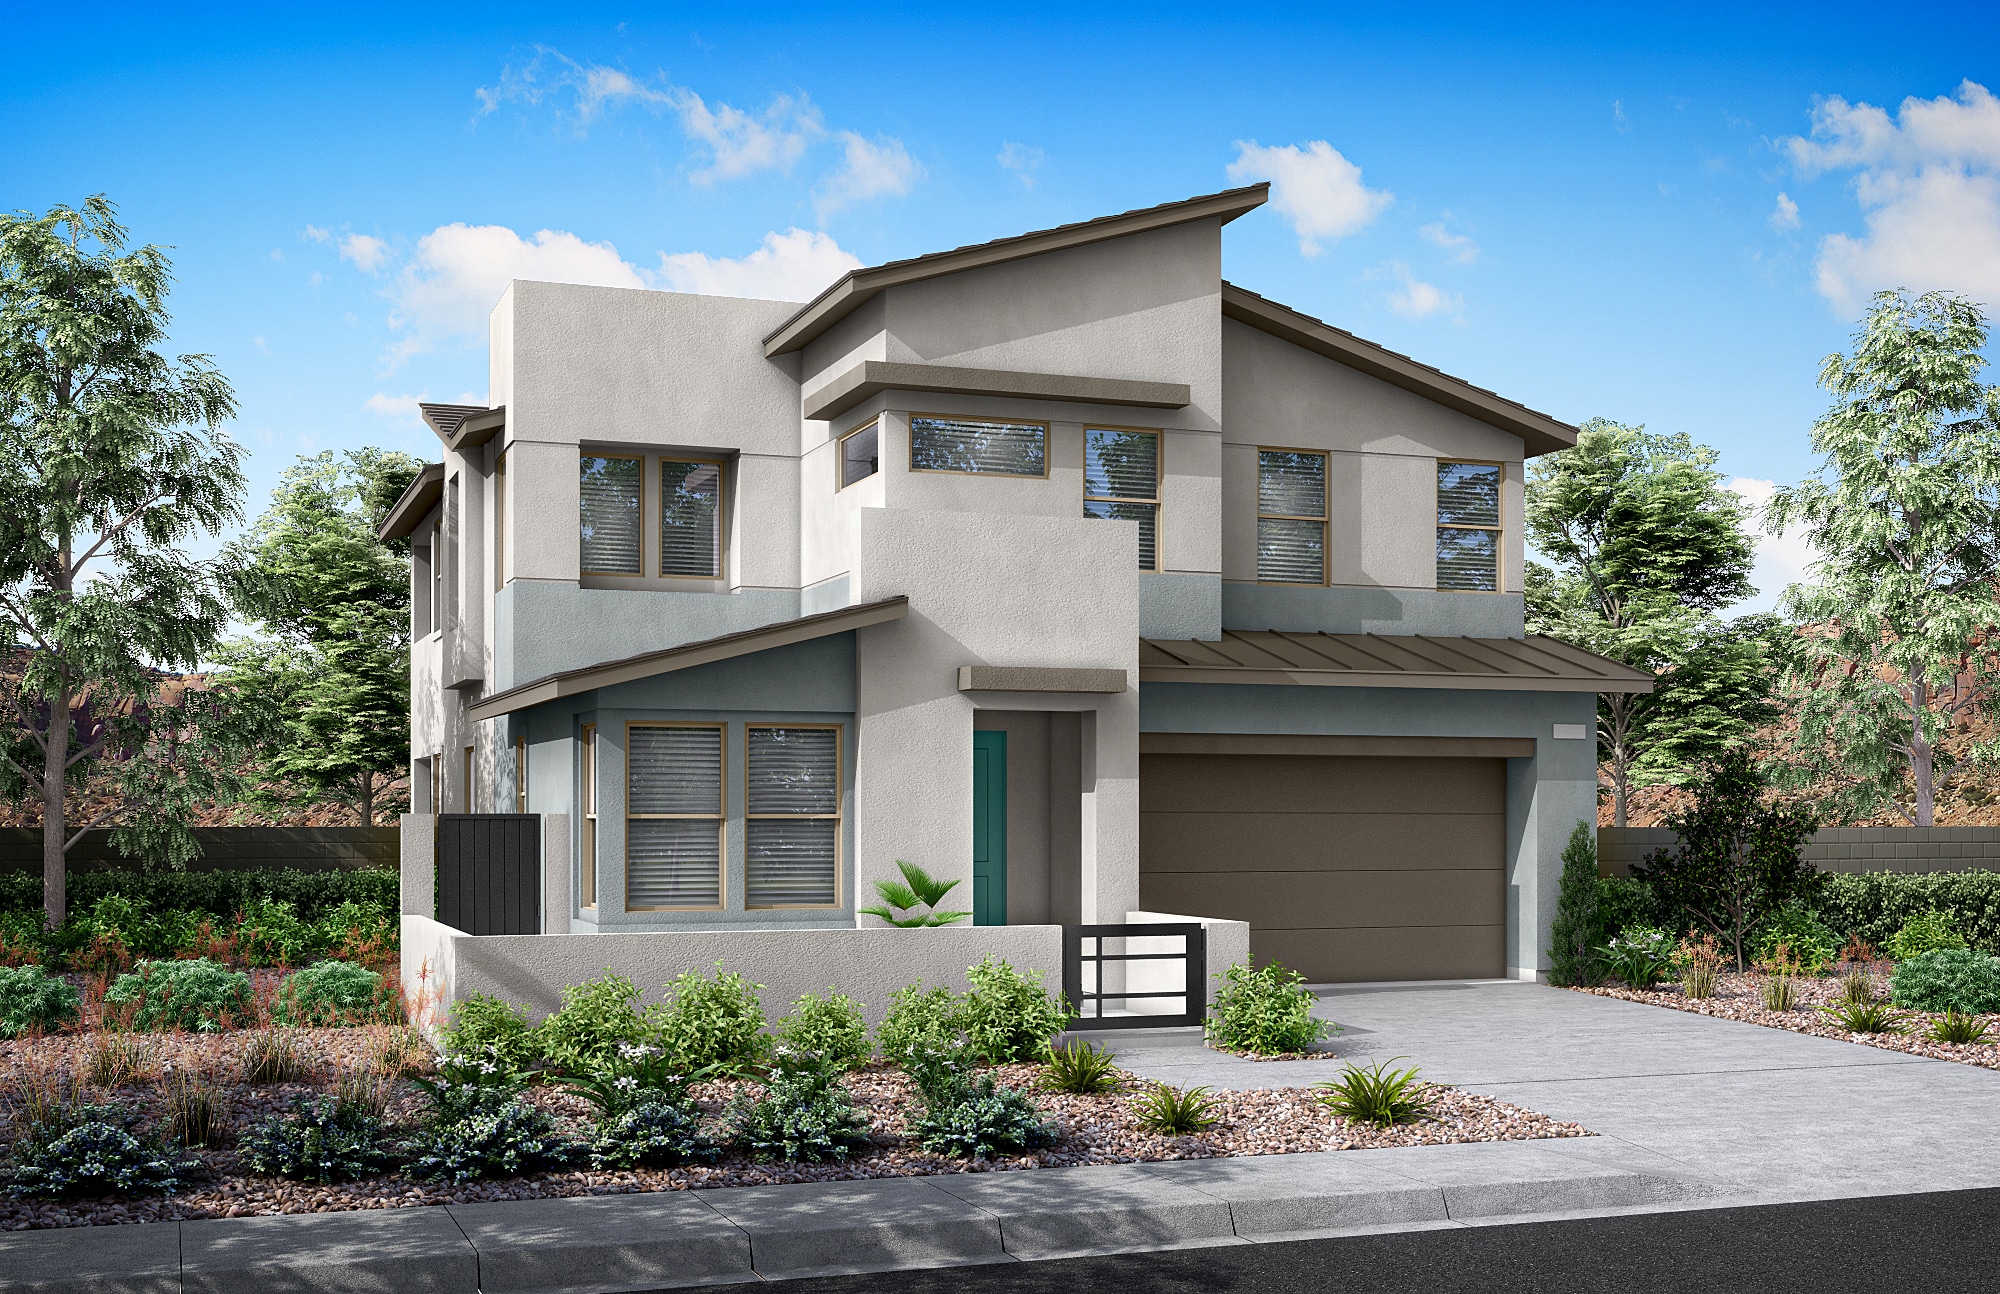 Front Elevation D of Plan 2 at Arroyo's Edge by Tri Pointe Homes